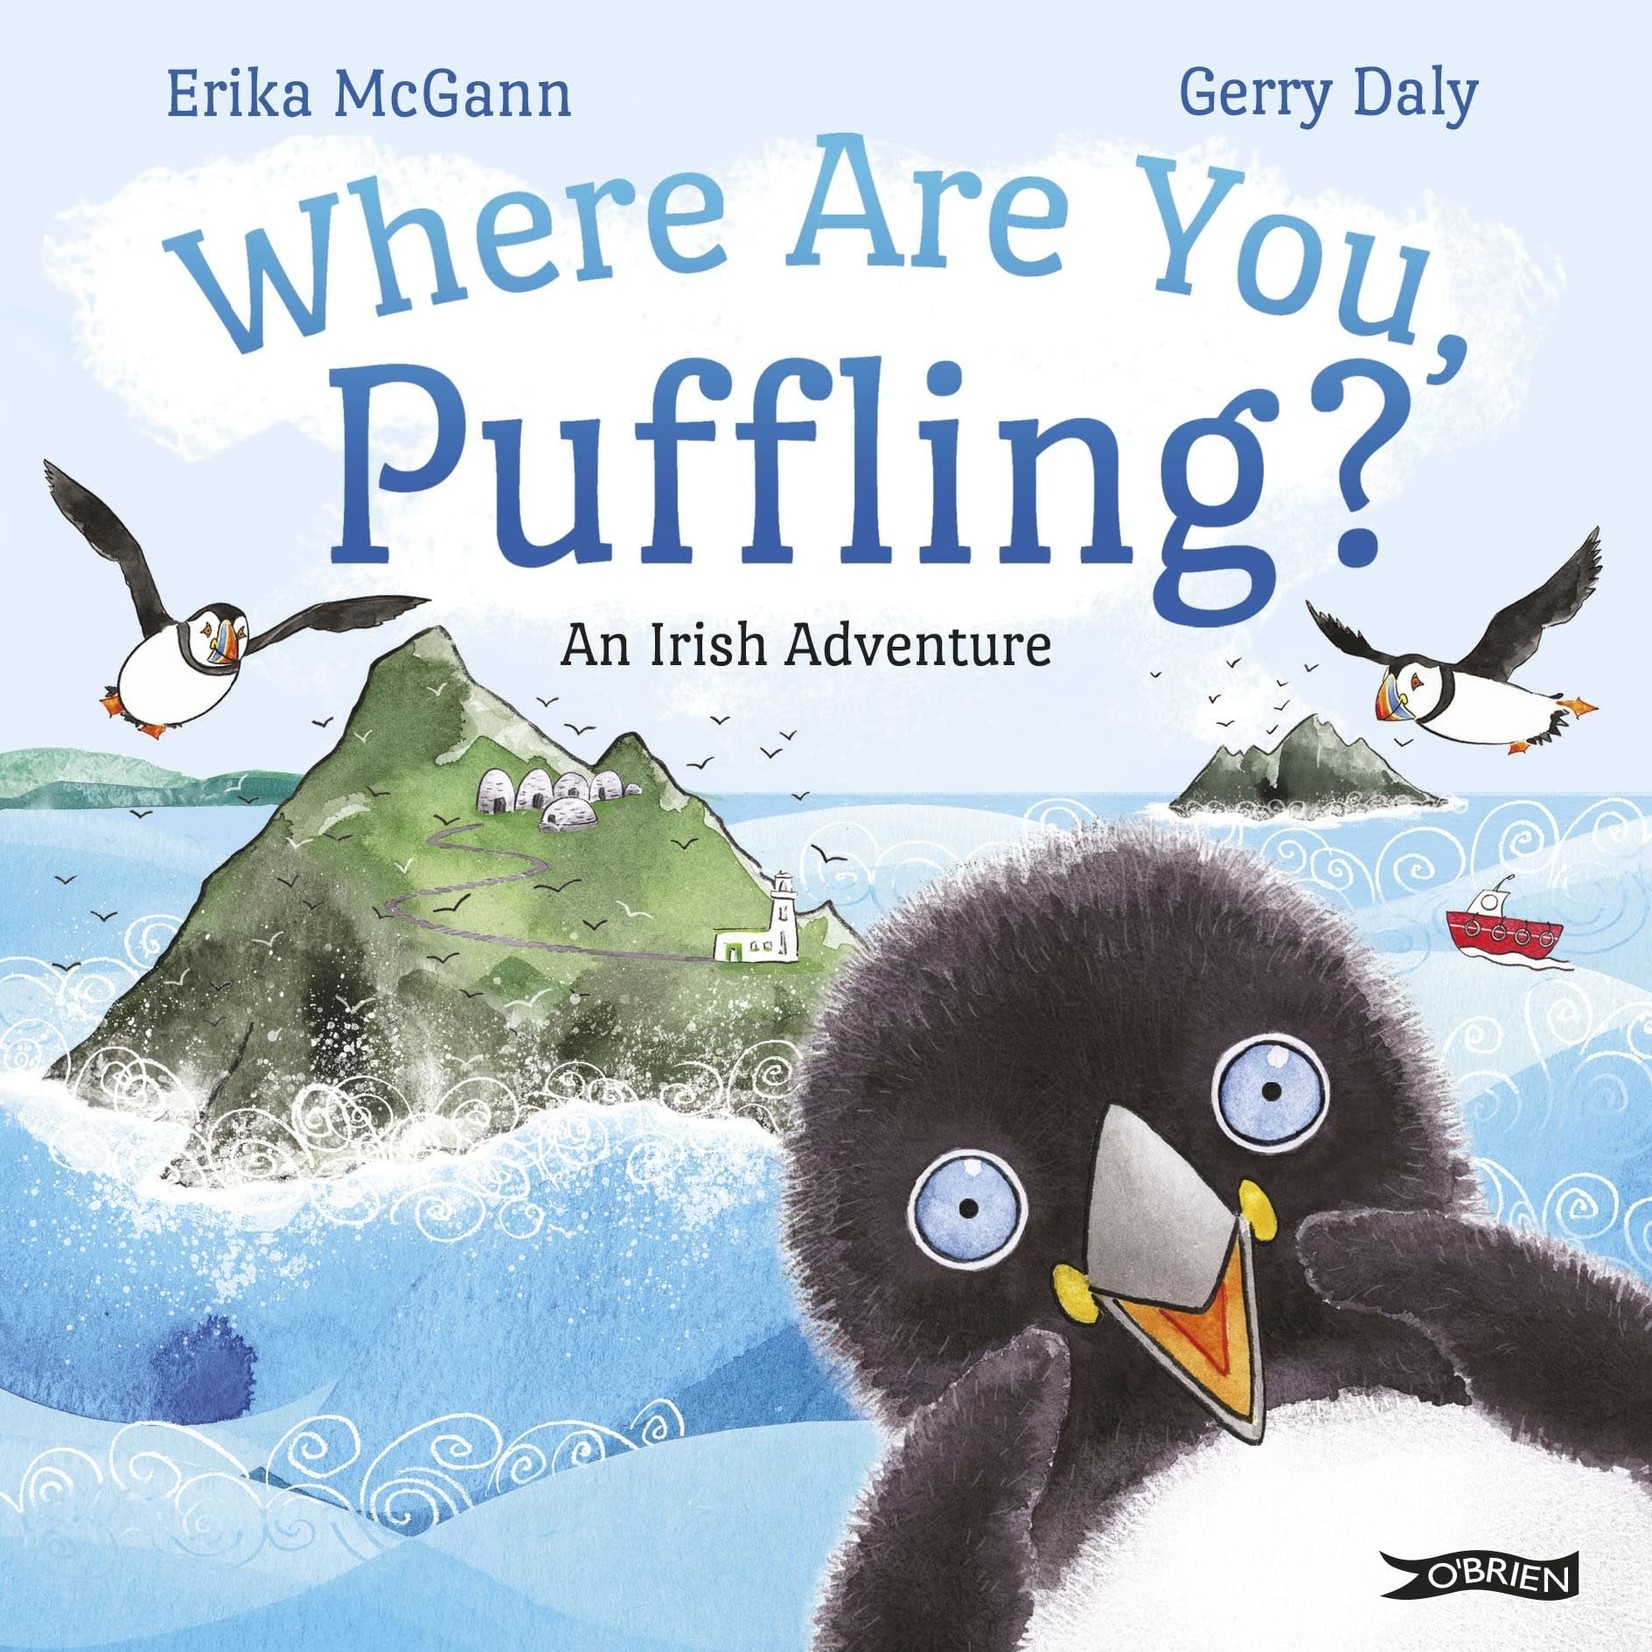 Celtic Books "Where Are You, Puffling?"